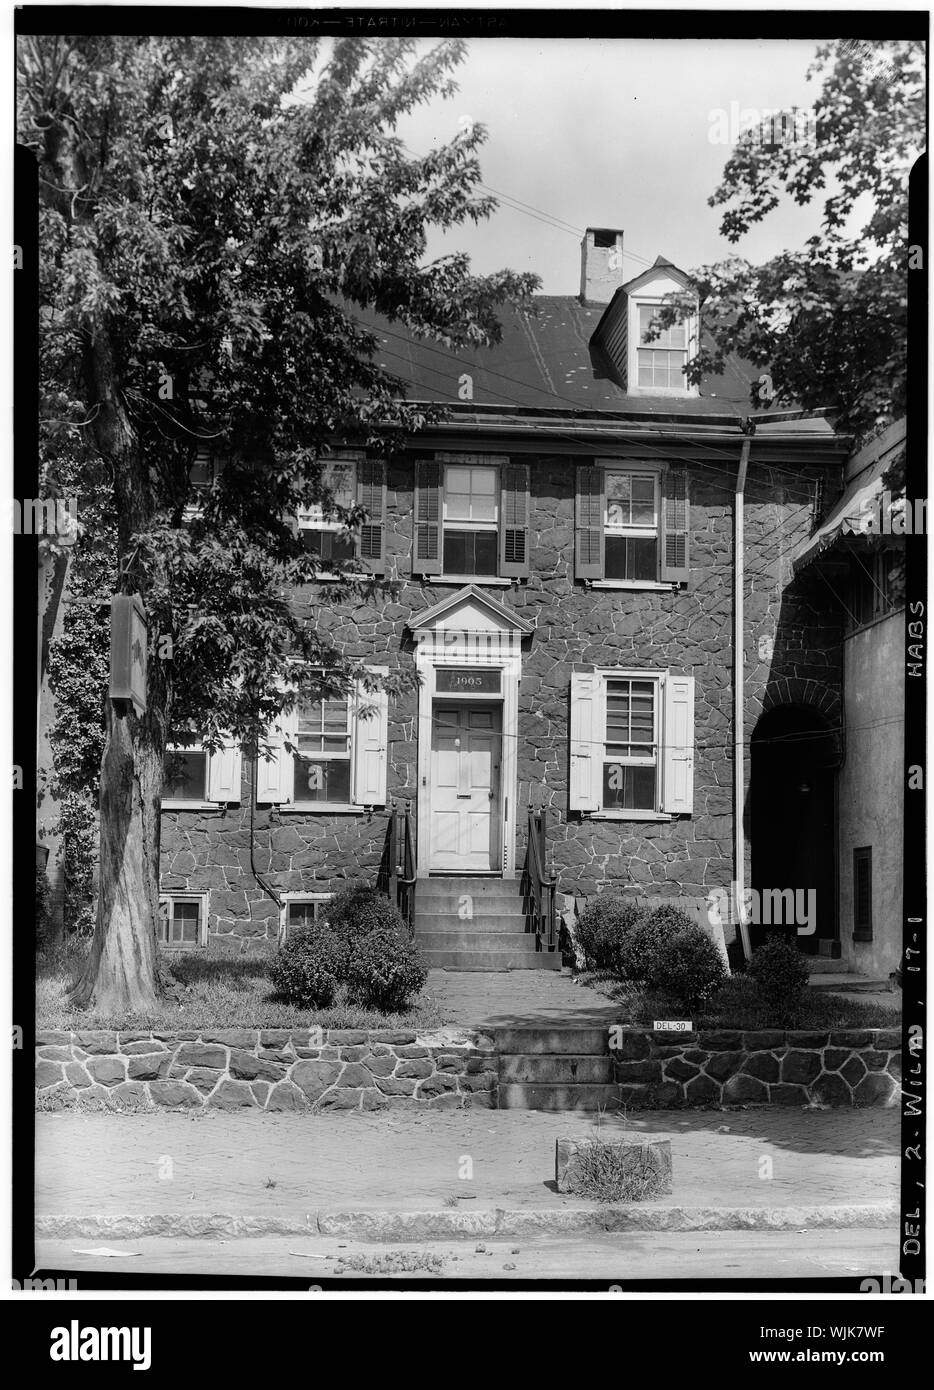 Historic American Buildings Survey W. S. Stewart, Photographer Aug.25, 1936 VIEW FROM SOUTH EAST - William Smith House, 1905 North Market Street, Wilmington, New Castle County, DE Stock Photo